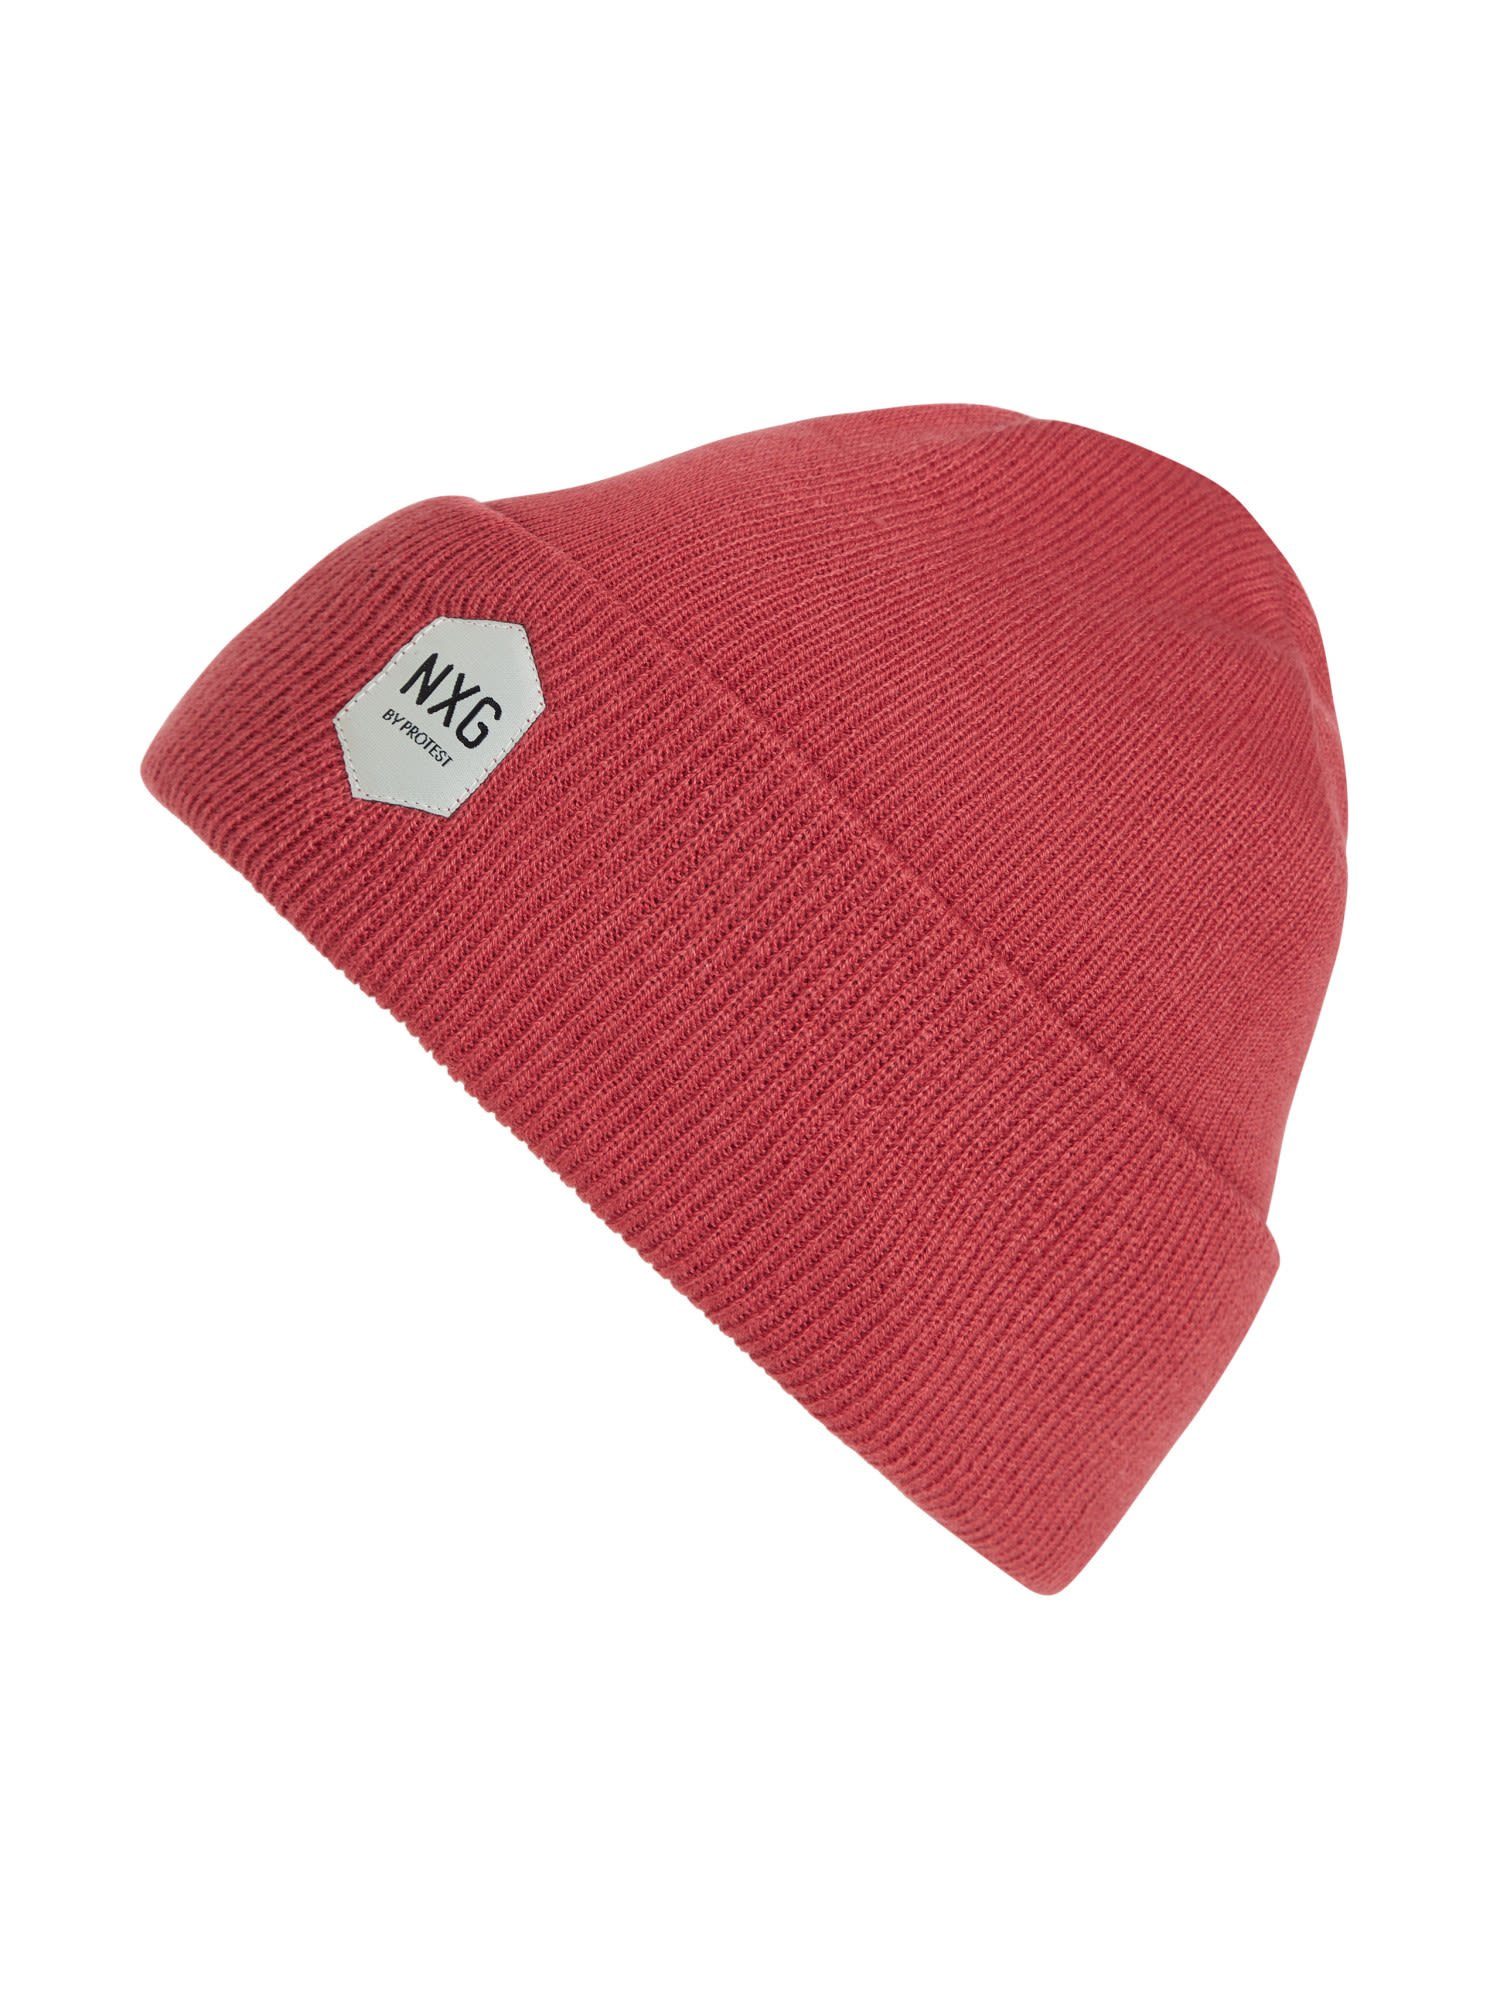 Protest Rebelly Accessoires Nxg Protest Beanie Rusticrust Beanie